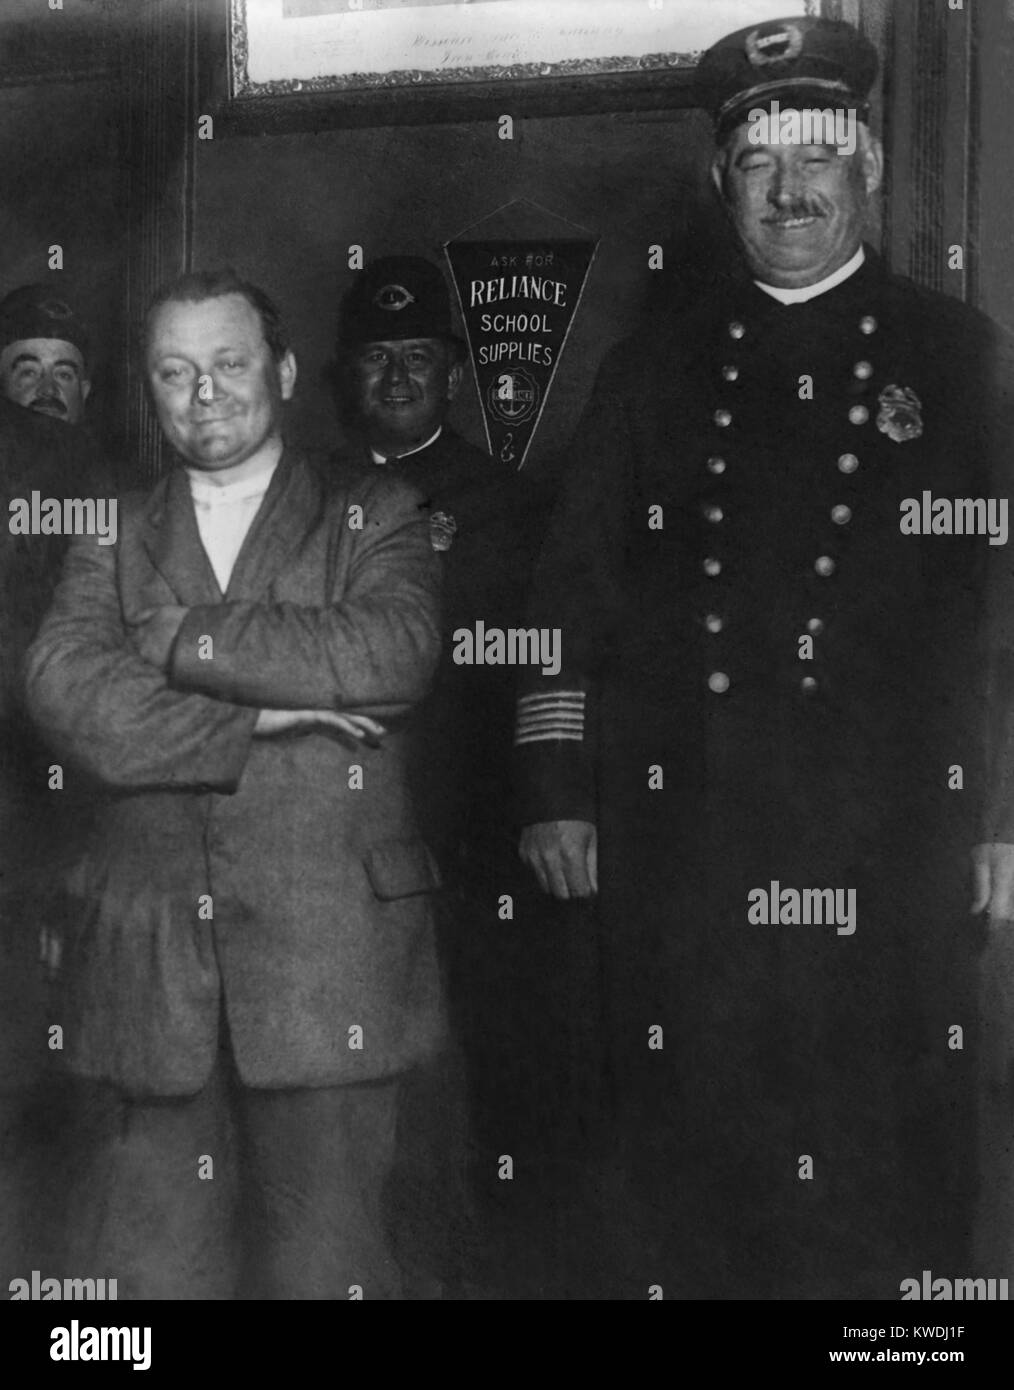 John Schrank, 36 year old German American who shot Theodore Roosevelt on Oct. 14, 1912. Photo taken while he was in police custody in Milwaukee, Wisconsin (BSLOC 2017 8 52) Stock Photo